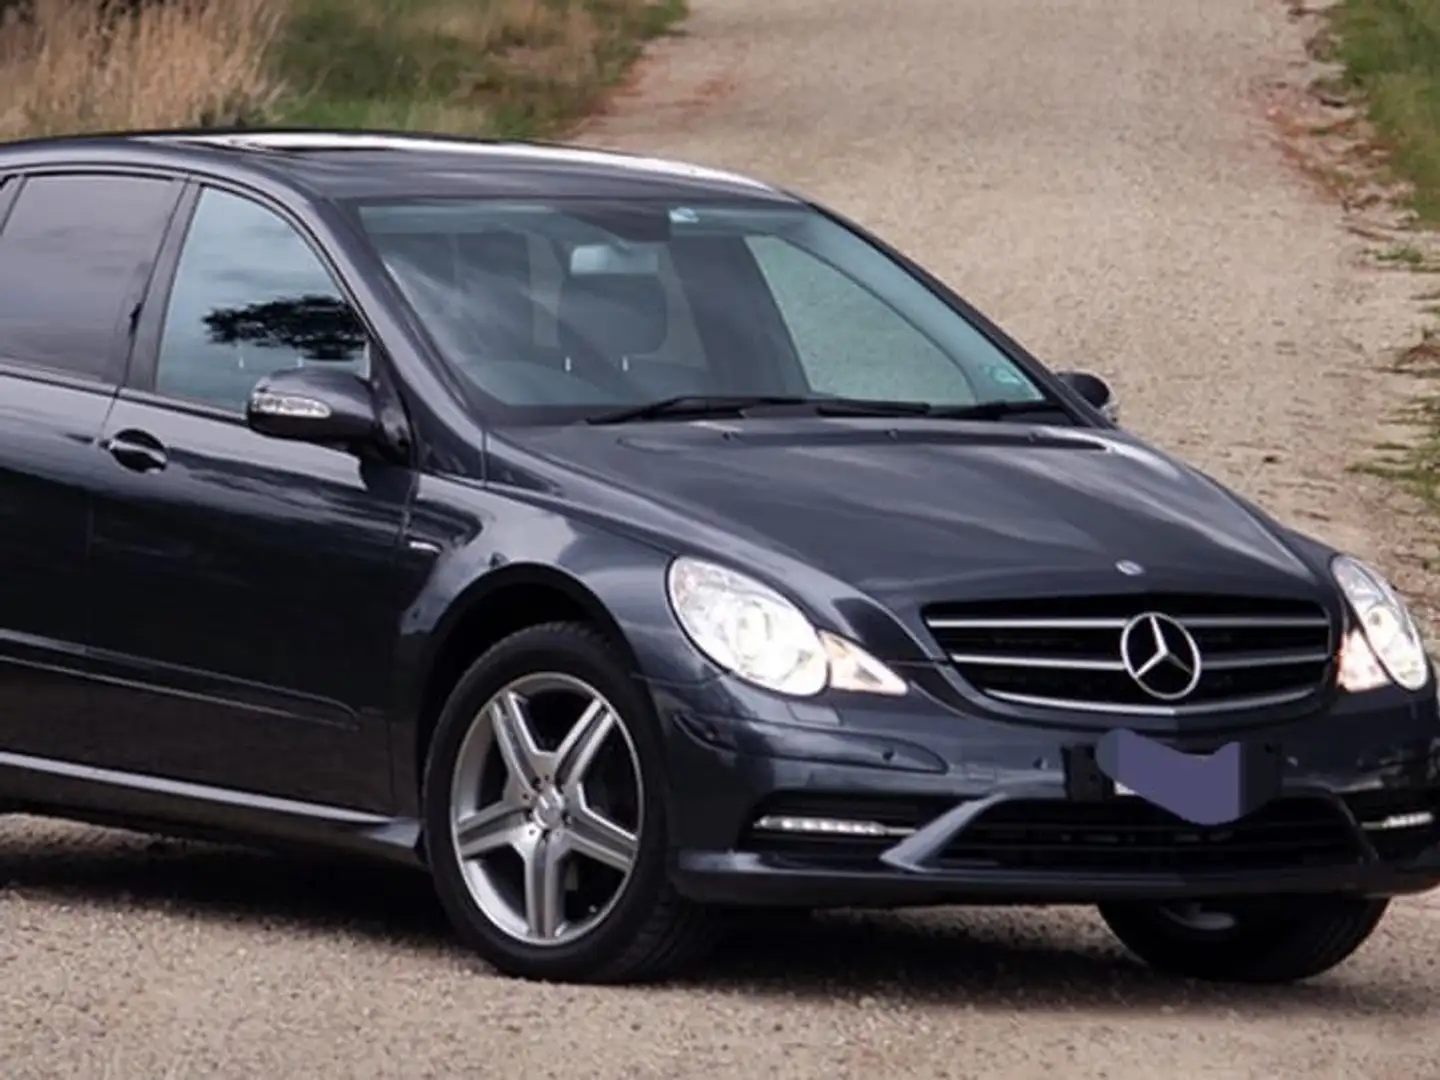 Mercedes-Benz R 300 CDI 4Matic 7G-TRONIC DPF Grand Edition Argent - 1